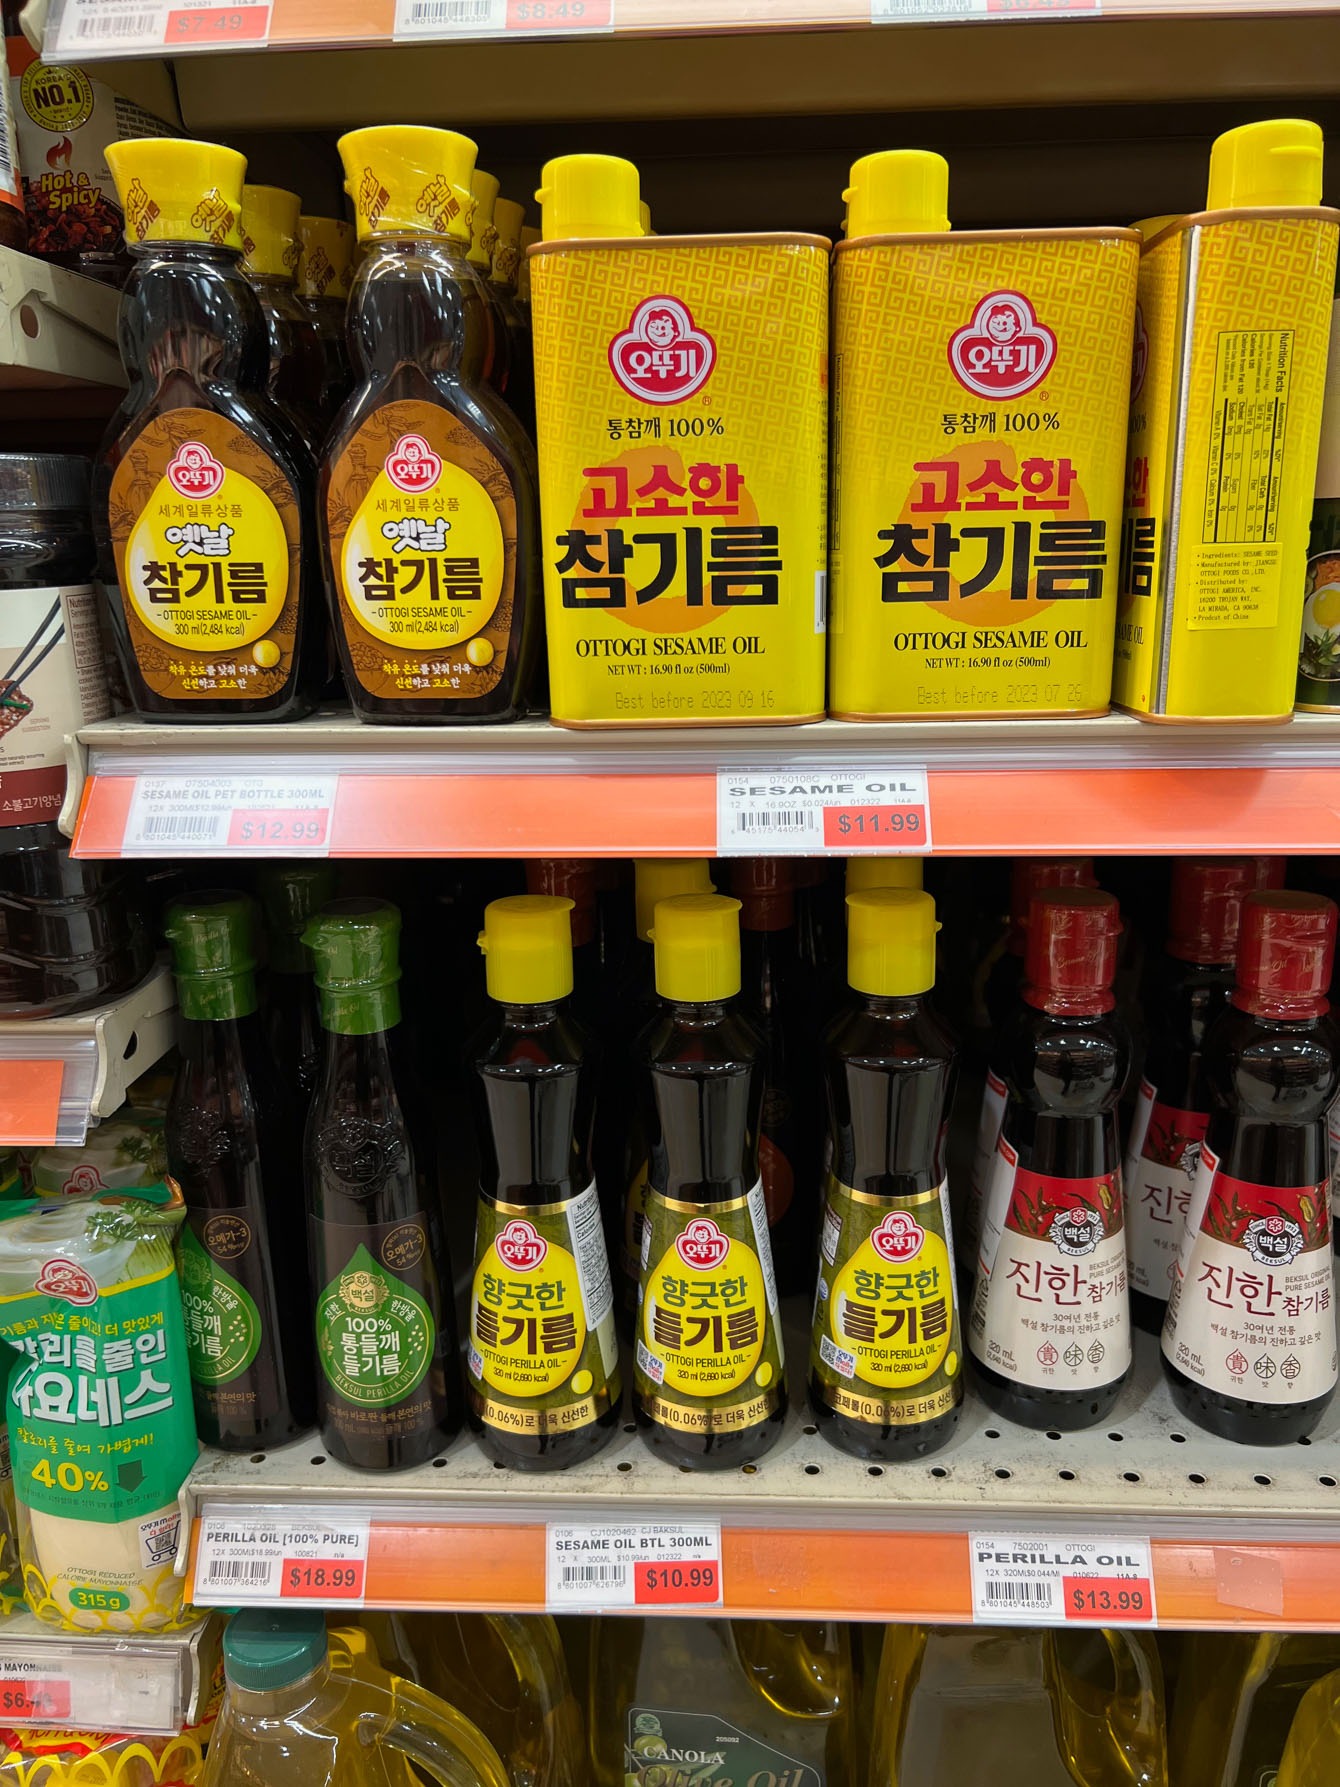 Korean sesame oil and perilla oil are side by side on the shelf